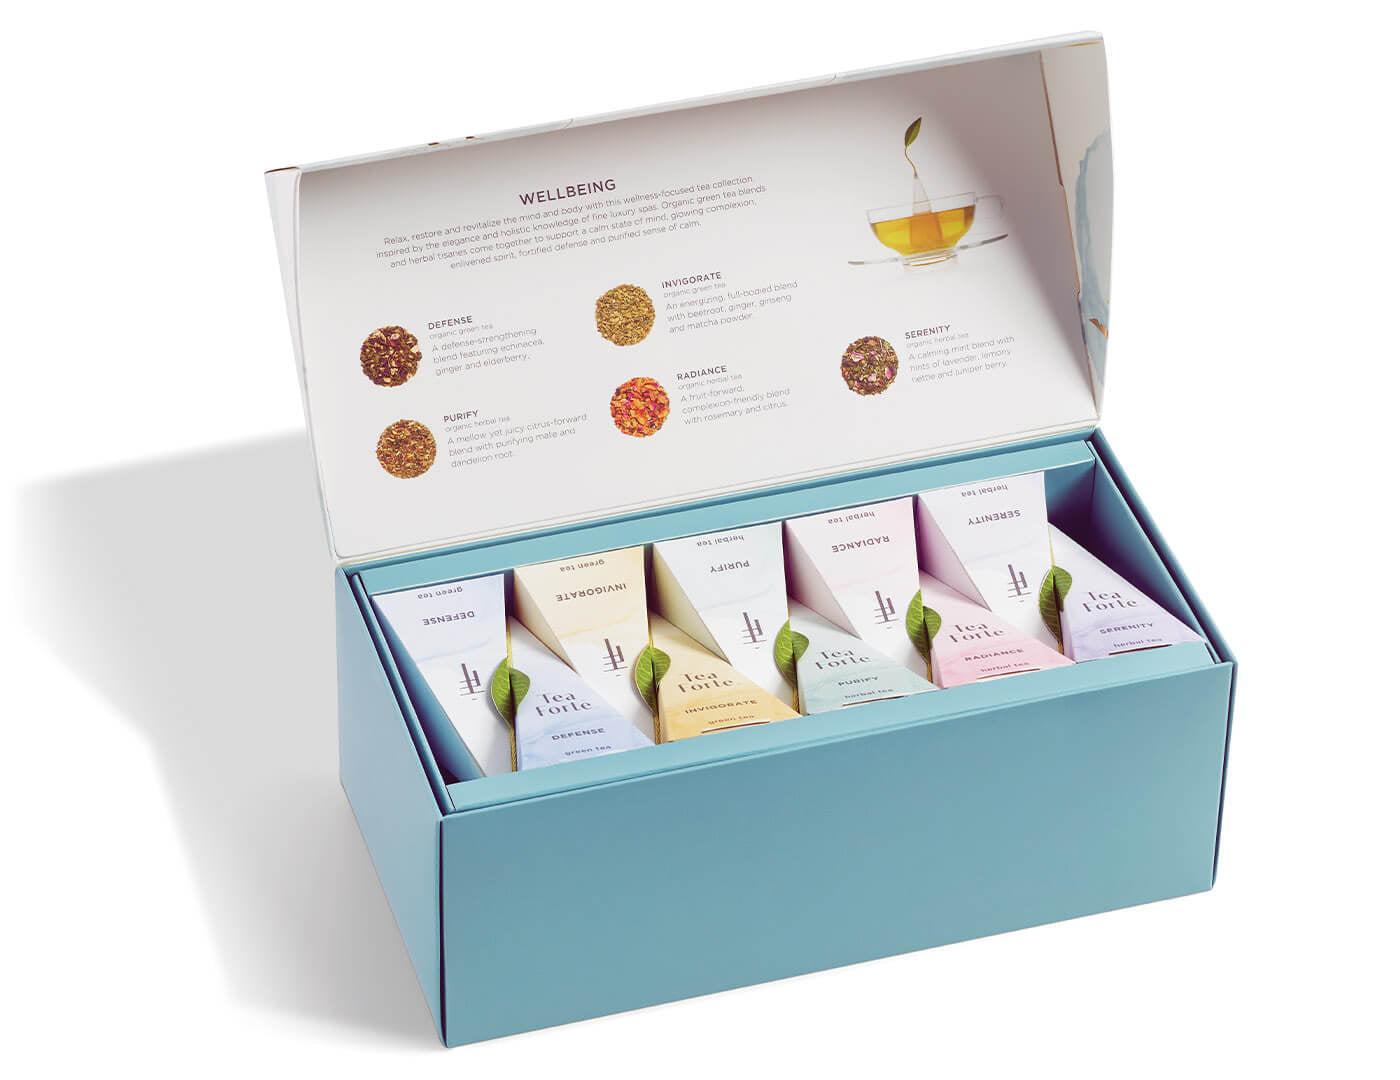 Wellbeing tea assortment in a 20 count presentation box with lid open